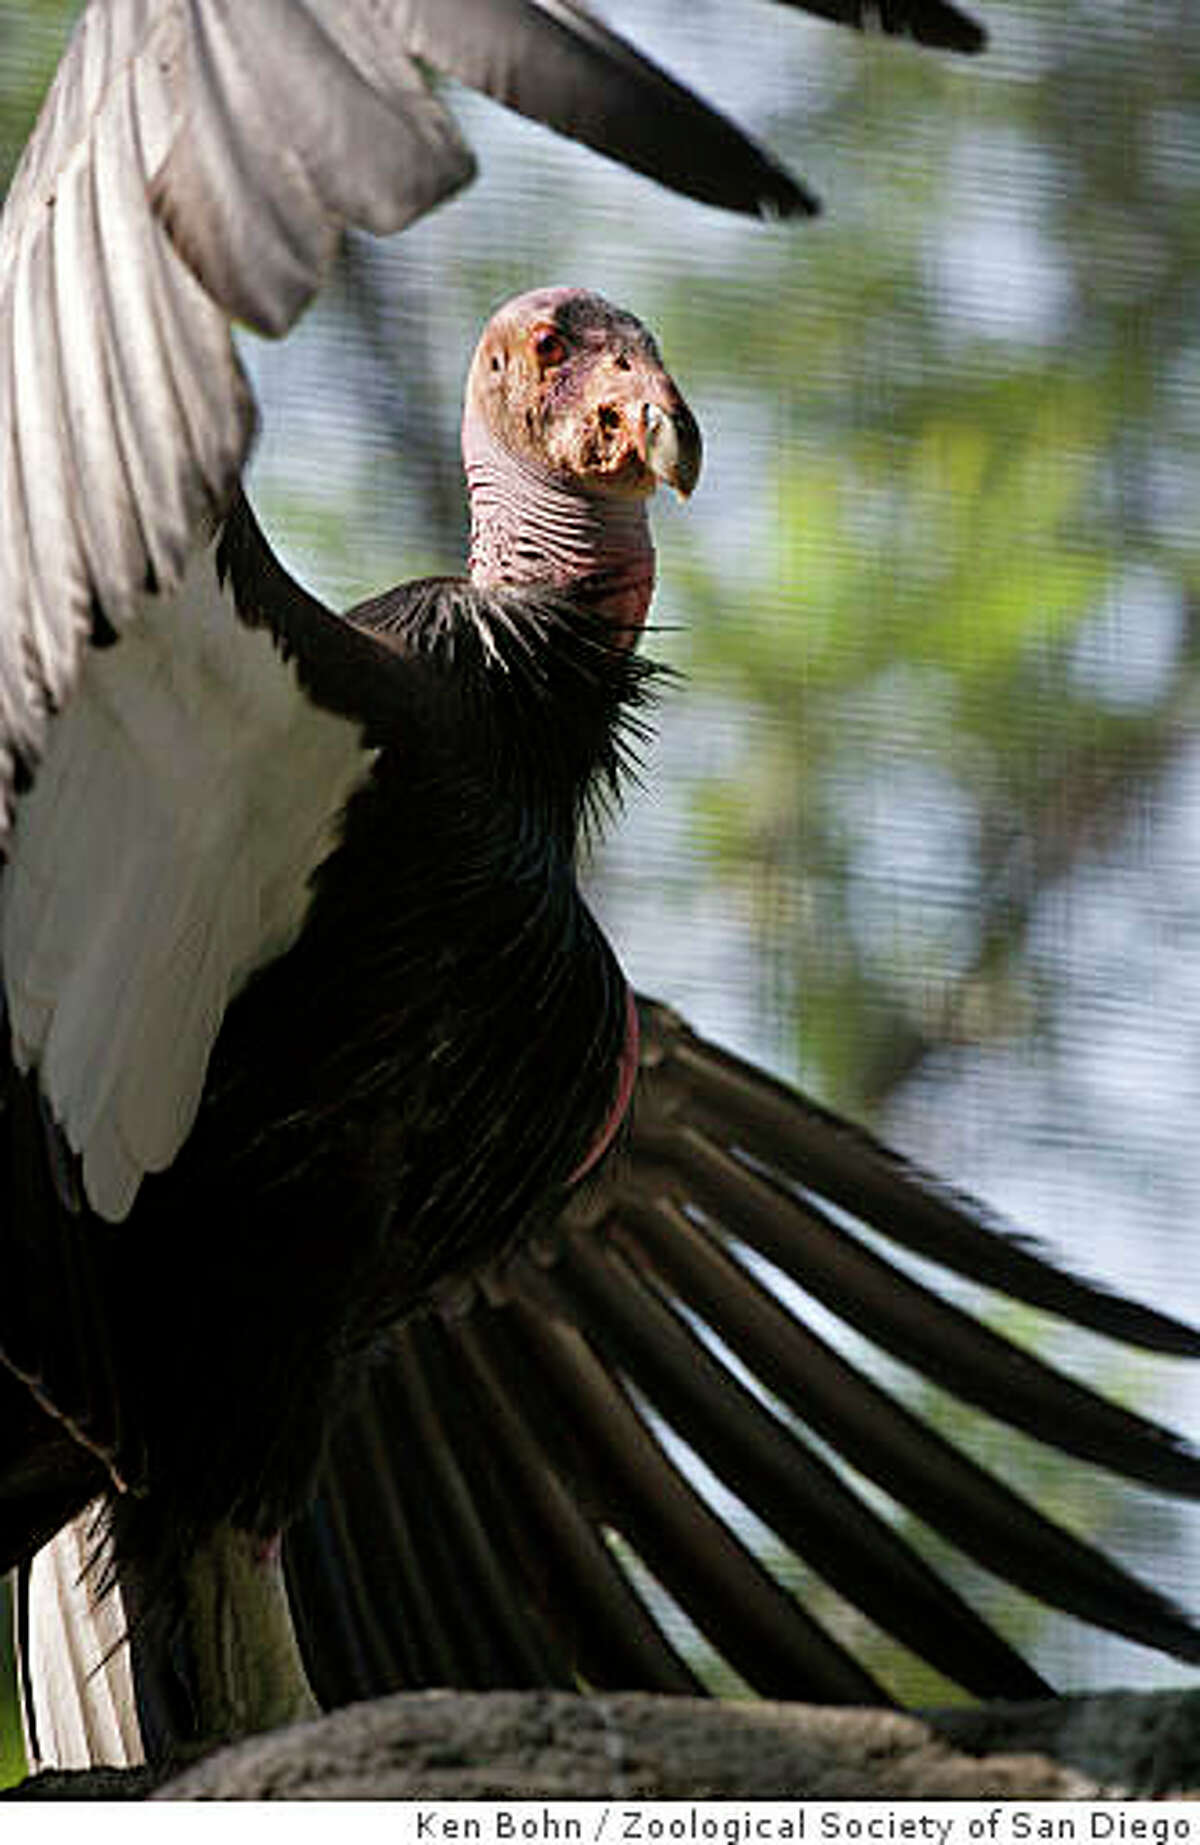 California condors need the protection afforded by a reinvigorated federal Endangered Species Act.